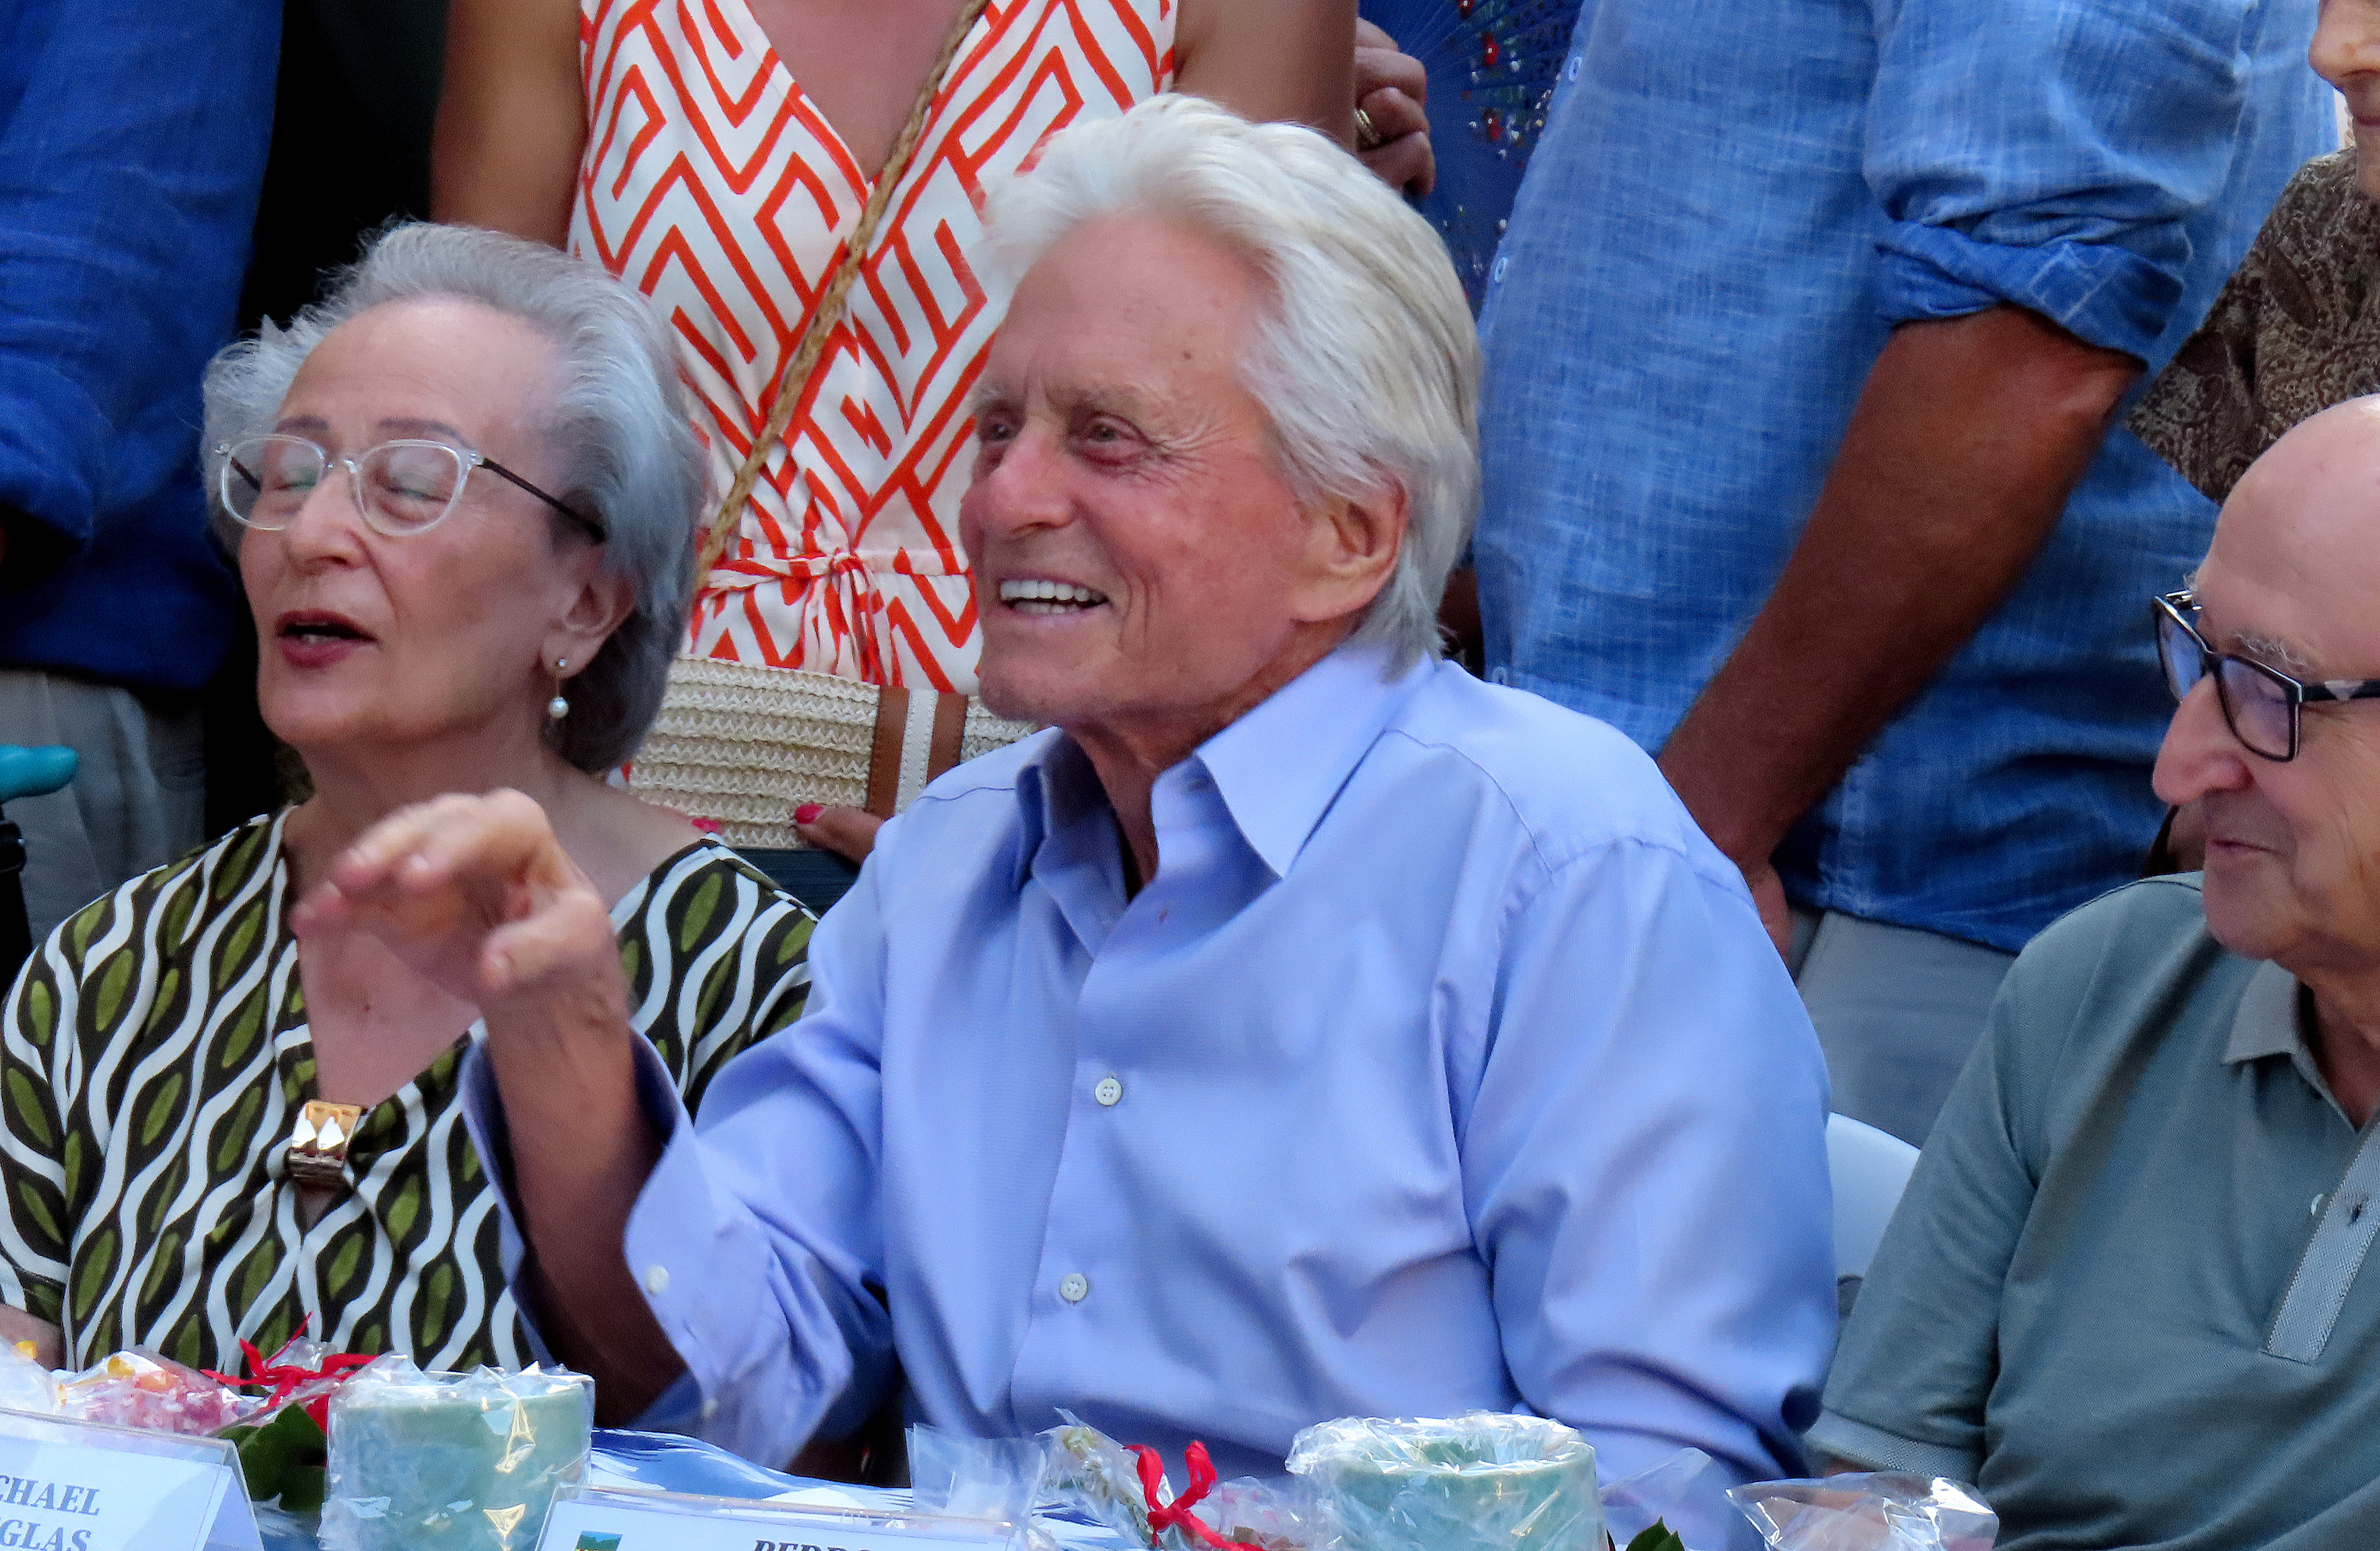 Michael Douglas was photographed beside other similarly aged Mallorca citizens outside Valldemossa Town Hall